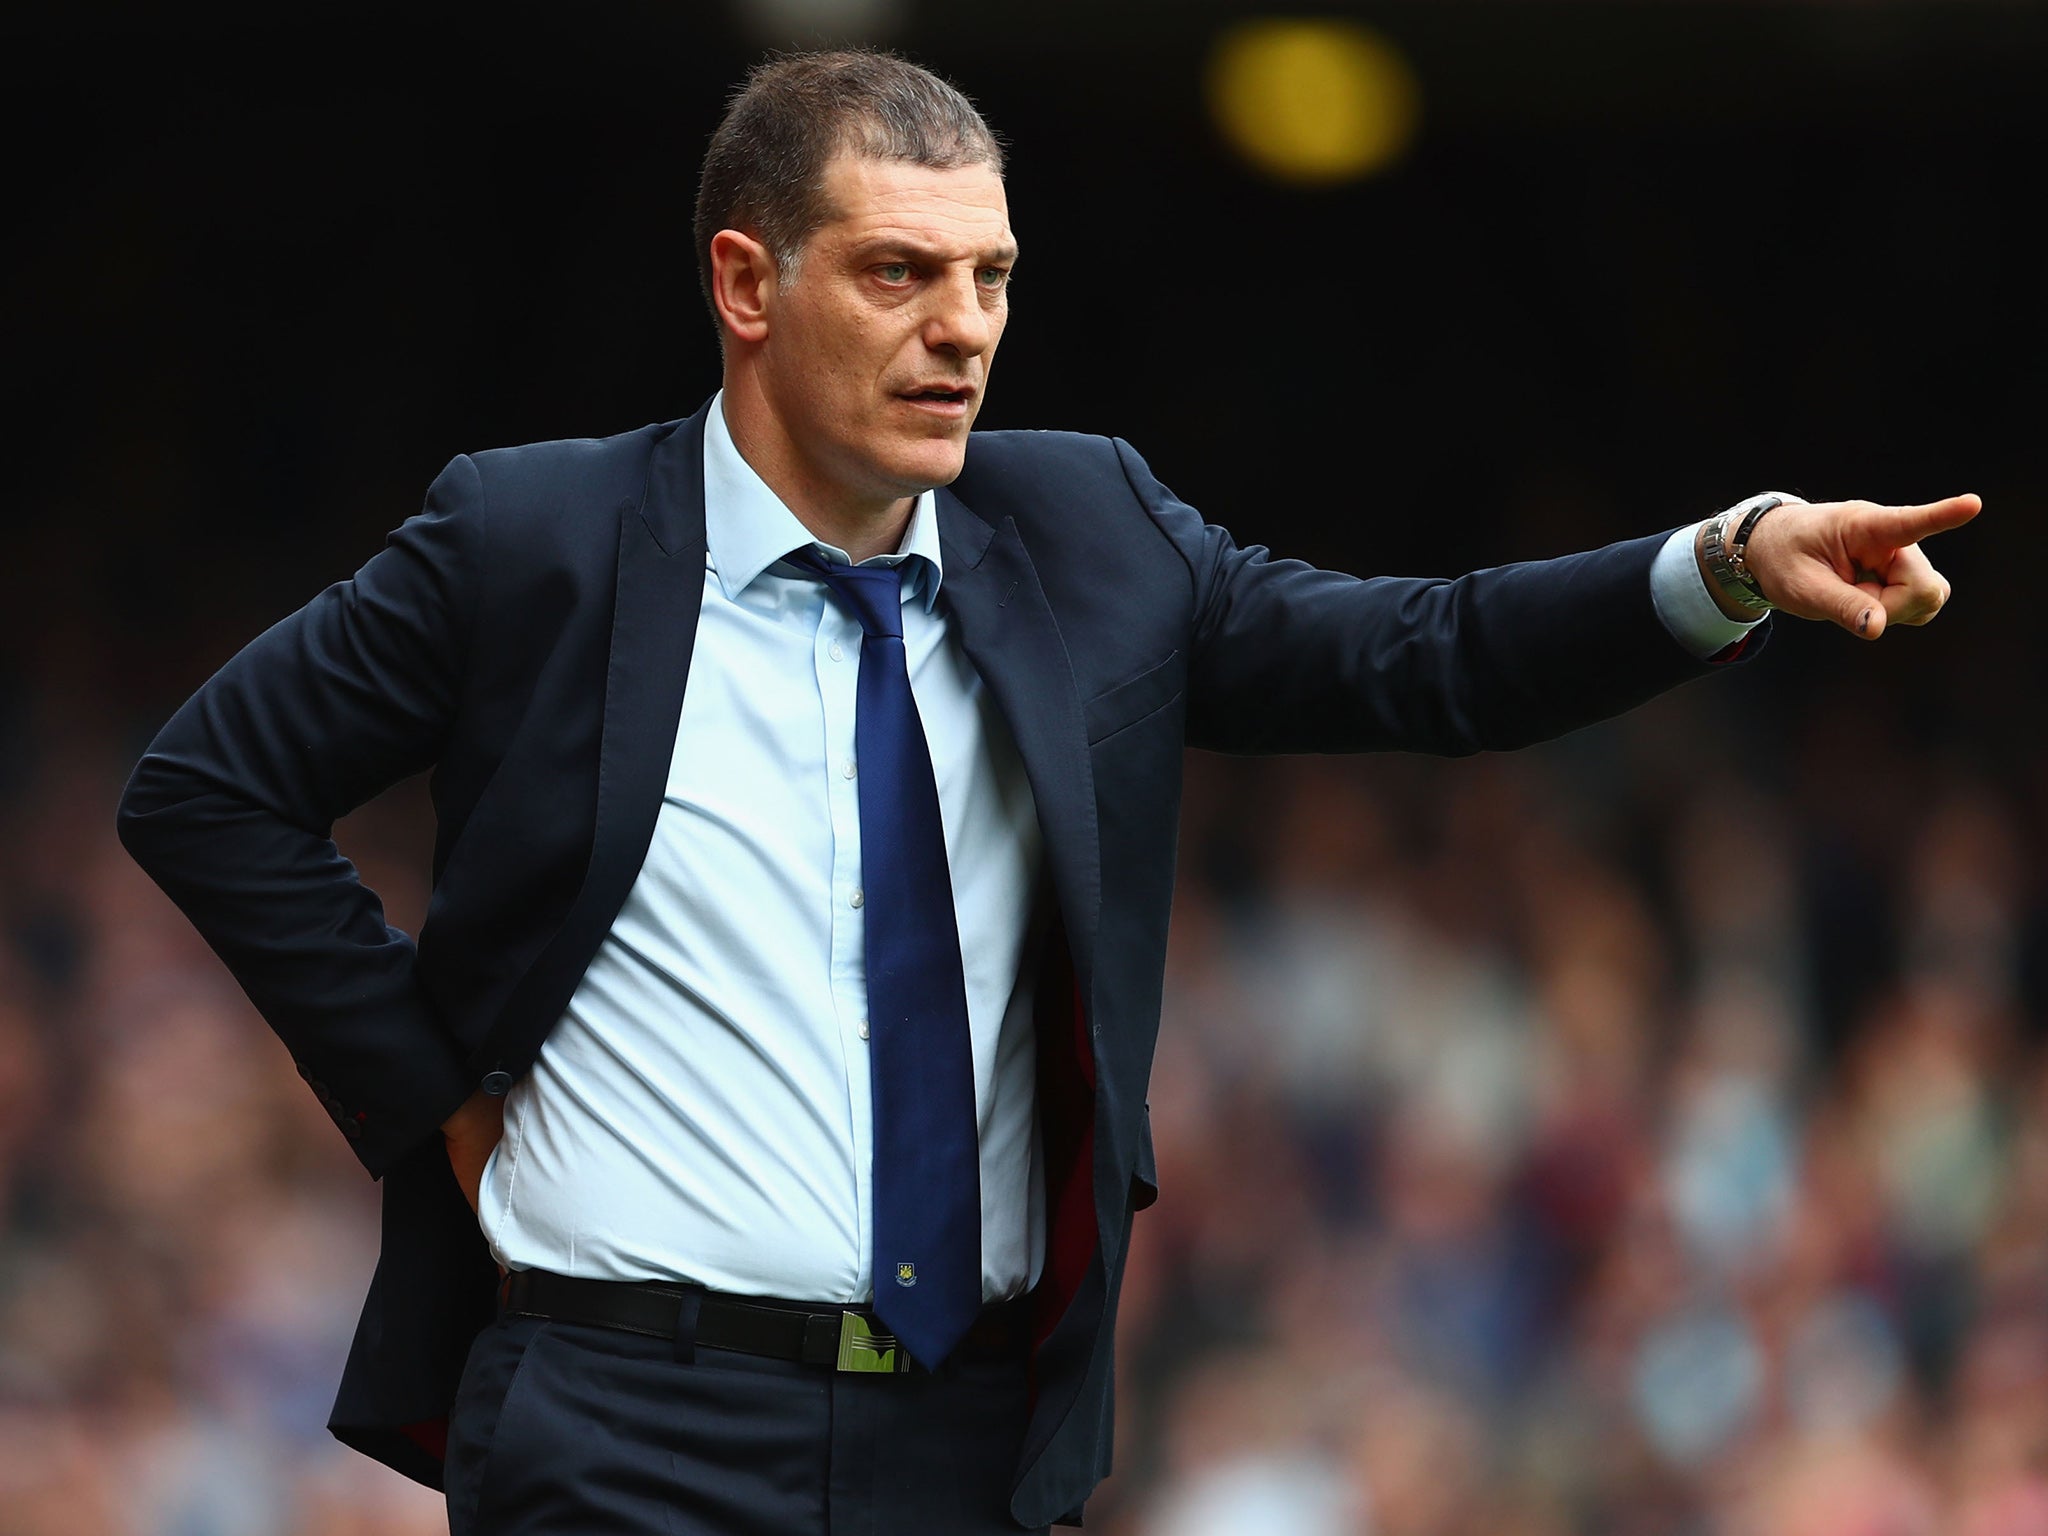 Bilic believes his side have 'a good chance to beat them' and progress